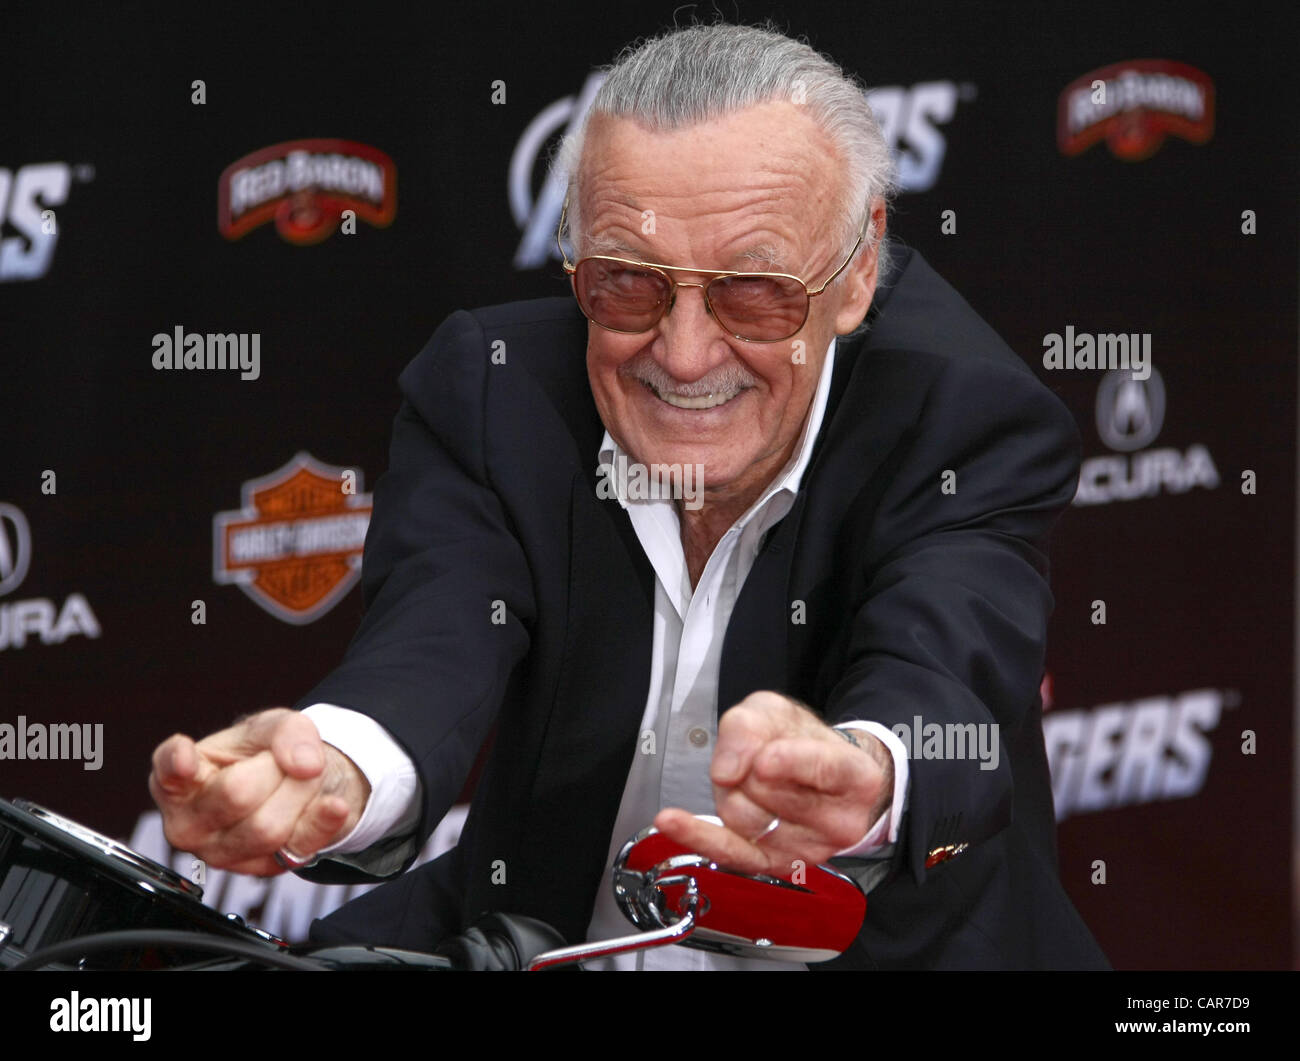 STAN LEE THE AVENGERS. WORLD PREMIERE HOLLYWOOD LOS ANGELES CALIFORNIA USA 11 April 2012 Stock Photo